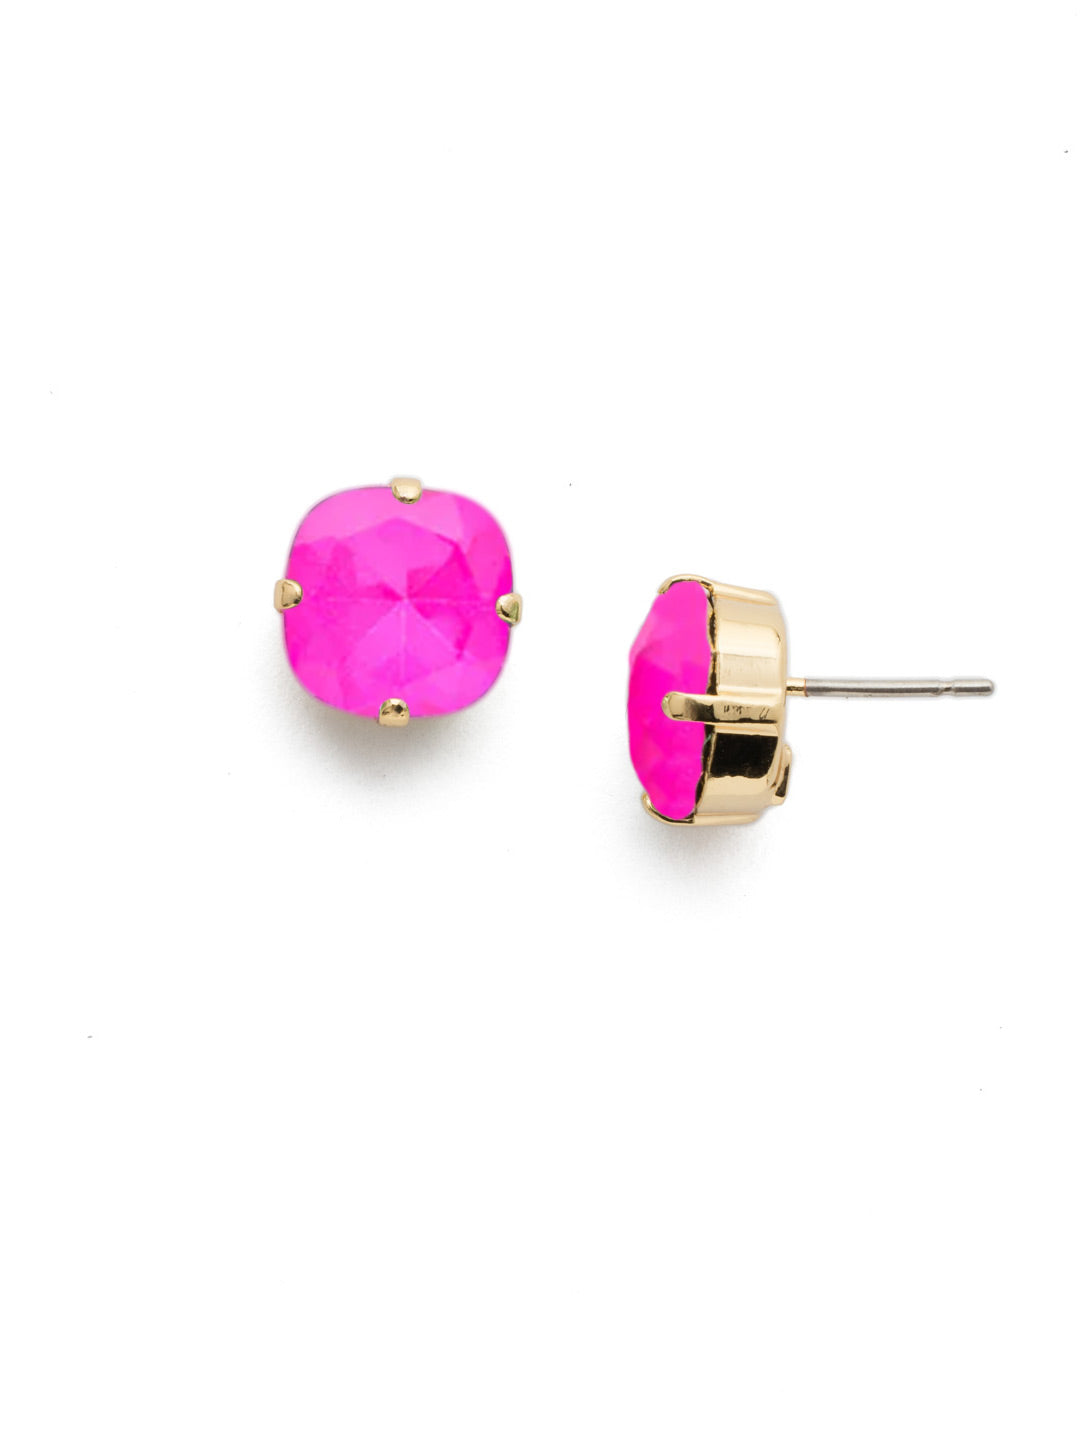 Halcyon Stud Earrings - EDH25BGWDW - <p>A beautiful, luminous cushion-cut crystal in a classic four-pronged setting that's ideal for everyday wear. From Sorrelli's Wild Watermelon collection in our Bright Gold-tone finish.</p>